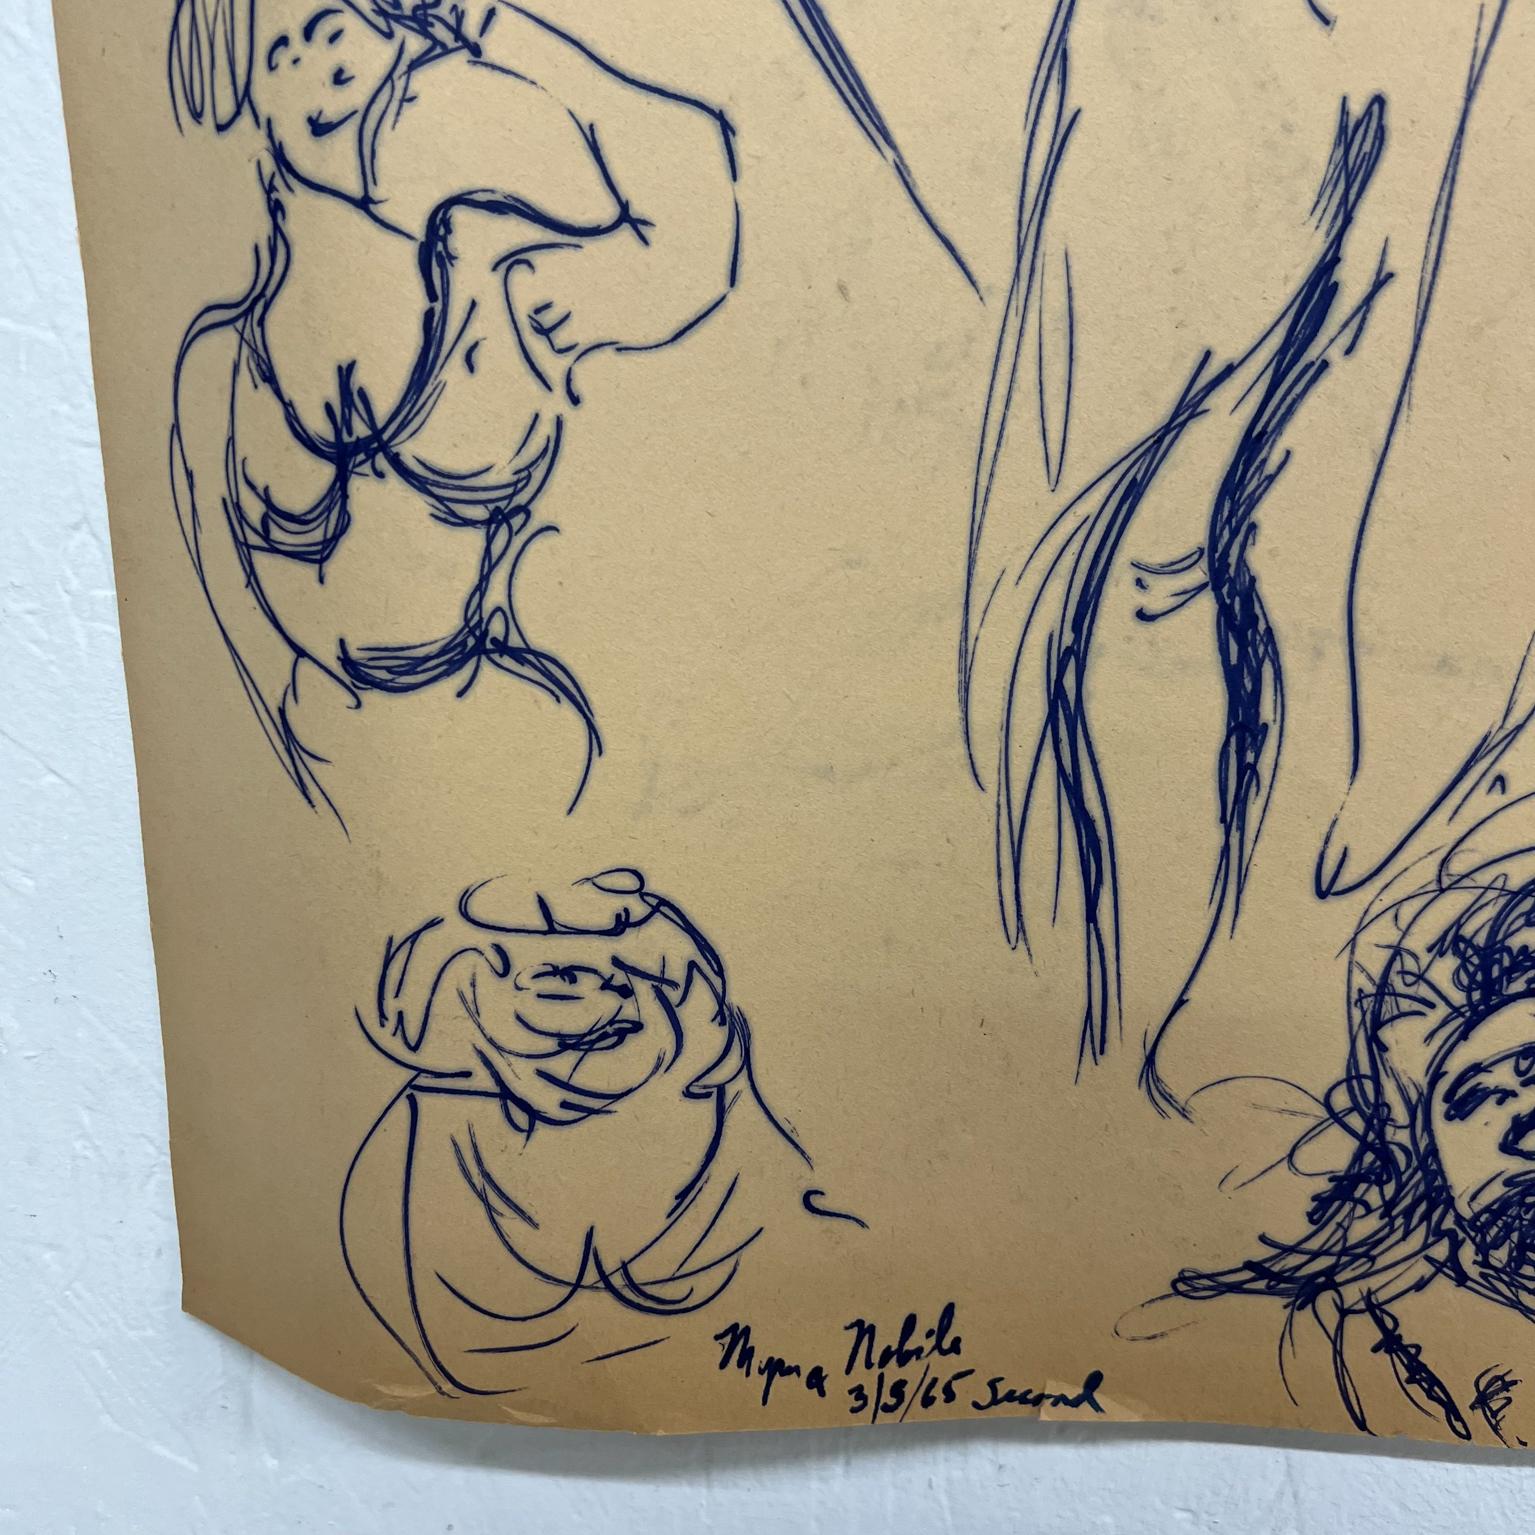 Mid-Century Modern Myrna Nobile Nude Art Paper Drawing #1 Signed 3/5/65 San Diego CA For Sale